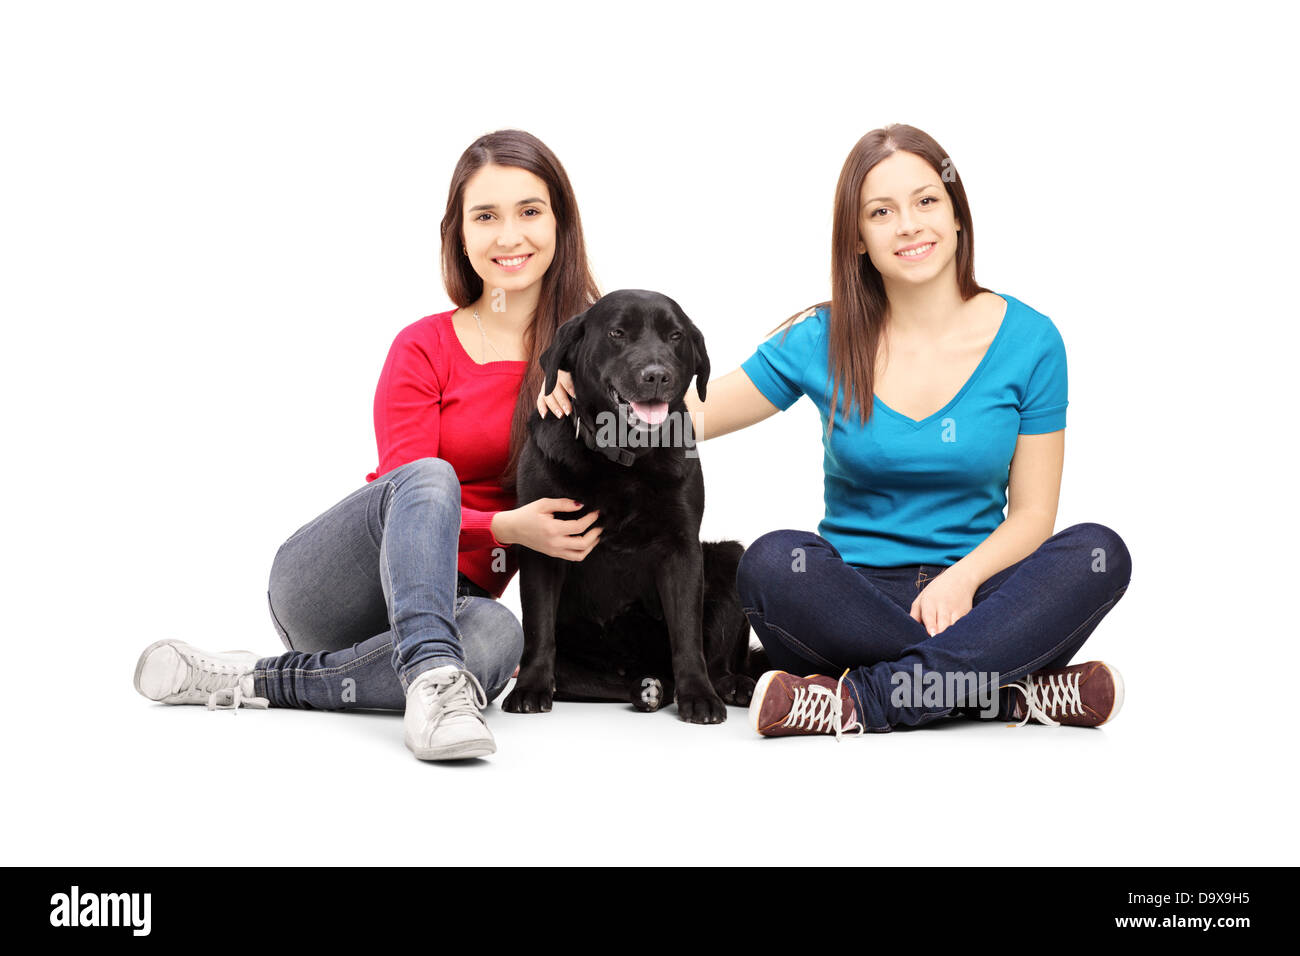 Two female friends sitting on a floor and posing with a black dog Stock Photo